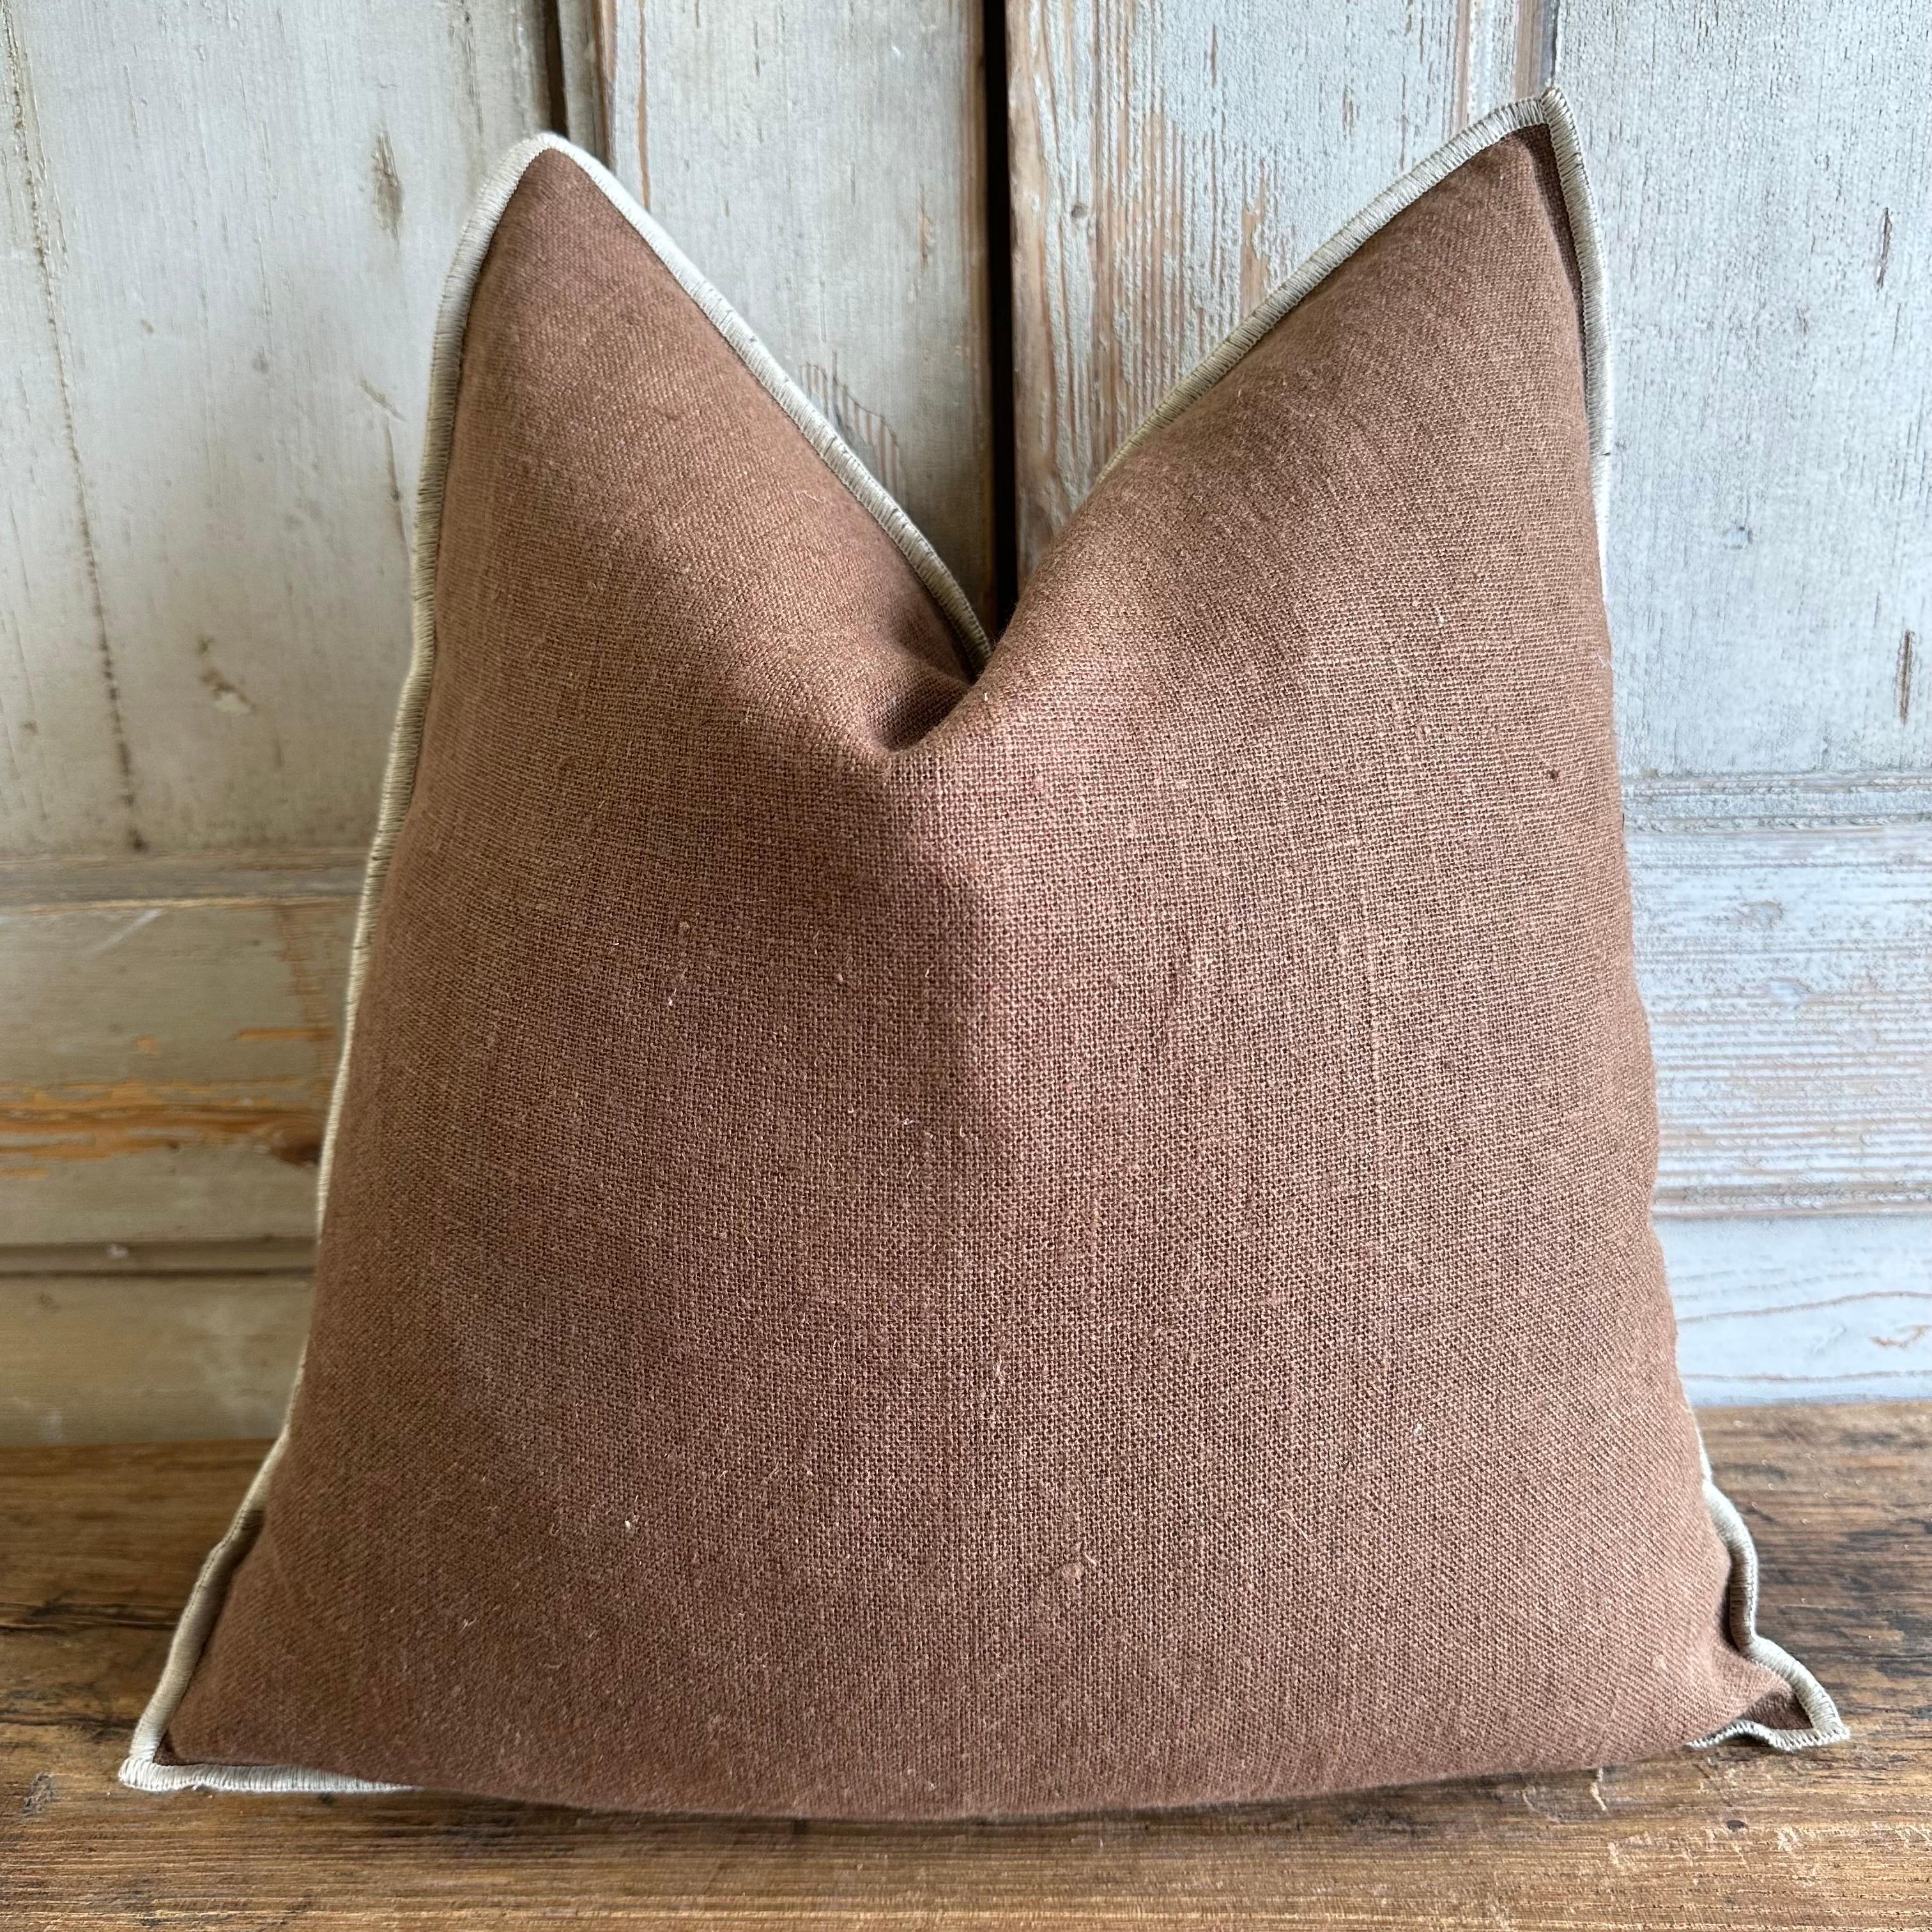 A beautiful 100% linen pillow with decorative stitched edge. 
Zipper closure, 90/10 down feather pillow is included.
Size: 18x18
Color: Moka, a rich coco color
Composition
100% linen, natural finish, european flax label
A beautiful accent